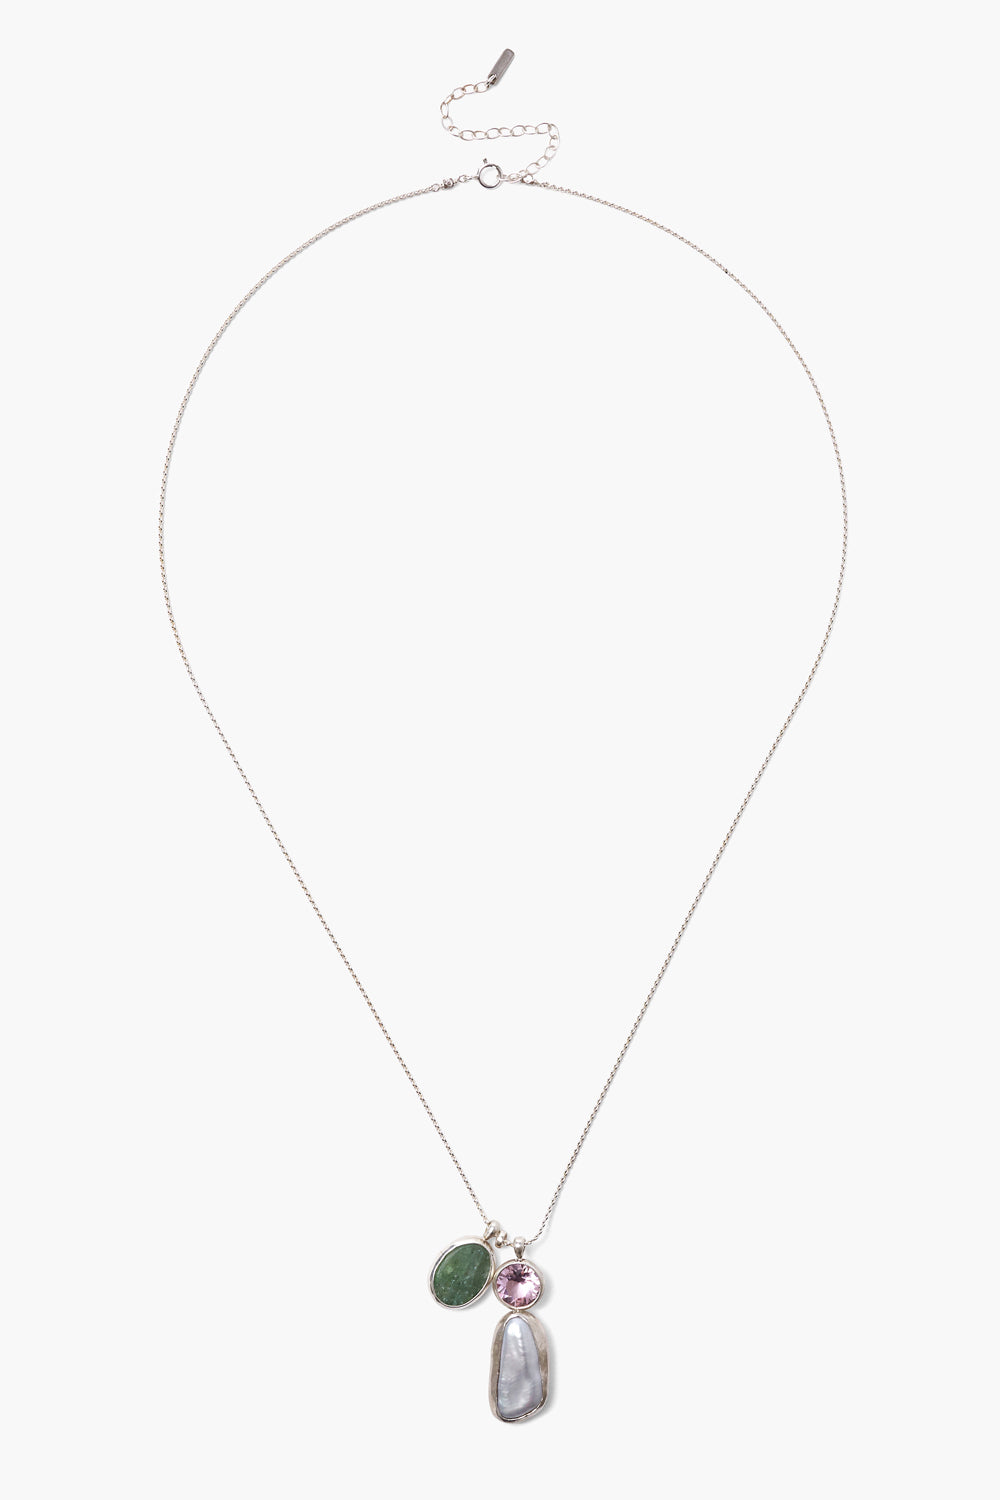 GREY PEARL MIX BEZEL DUO CHARM ADJUSTABLE NECKLACE - Kingfisher Road - Online Boutique